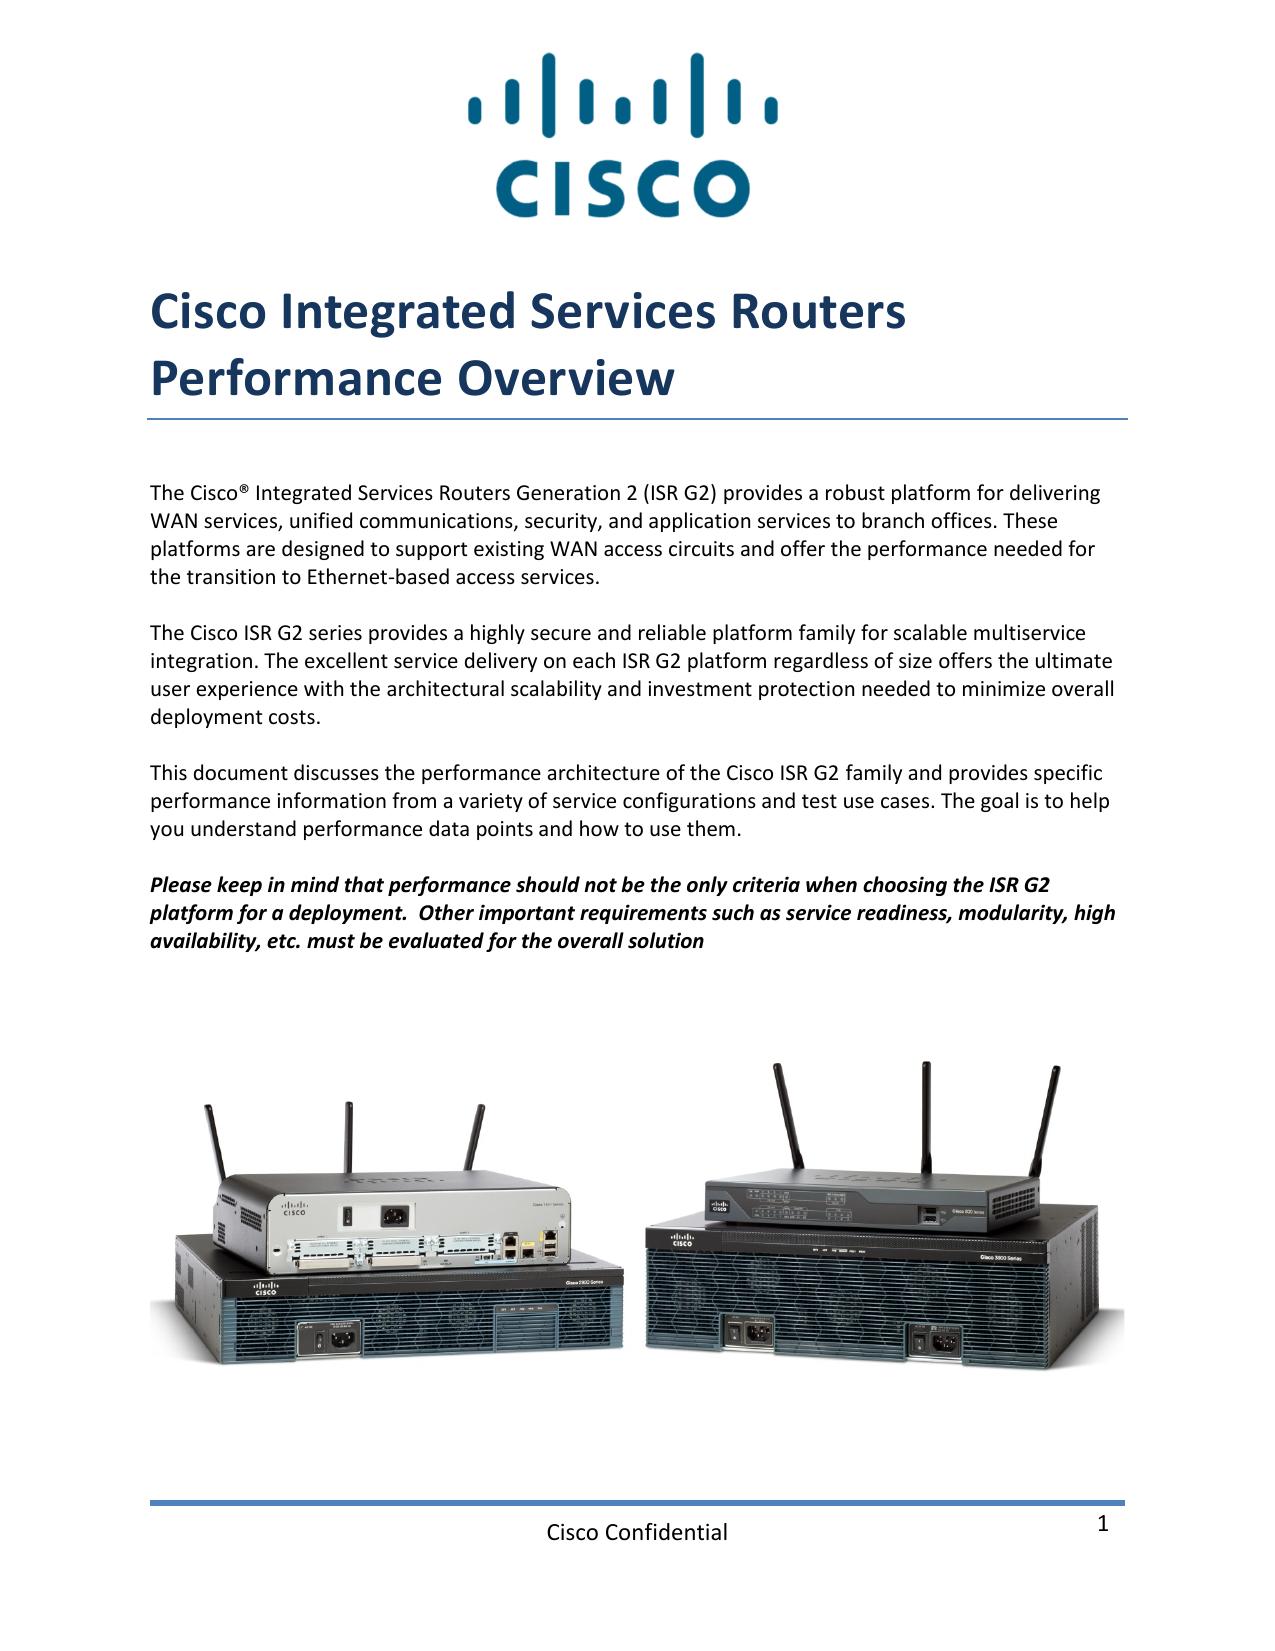 Cisco Integrated Services Router Generation 2 (ISR G2) Performance Whitepaper